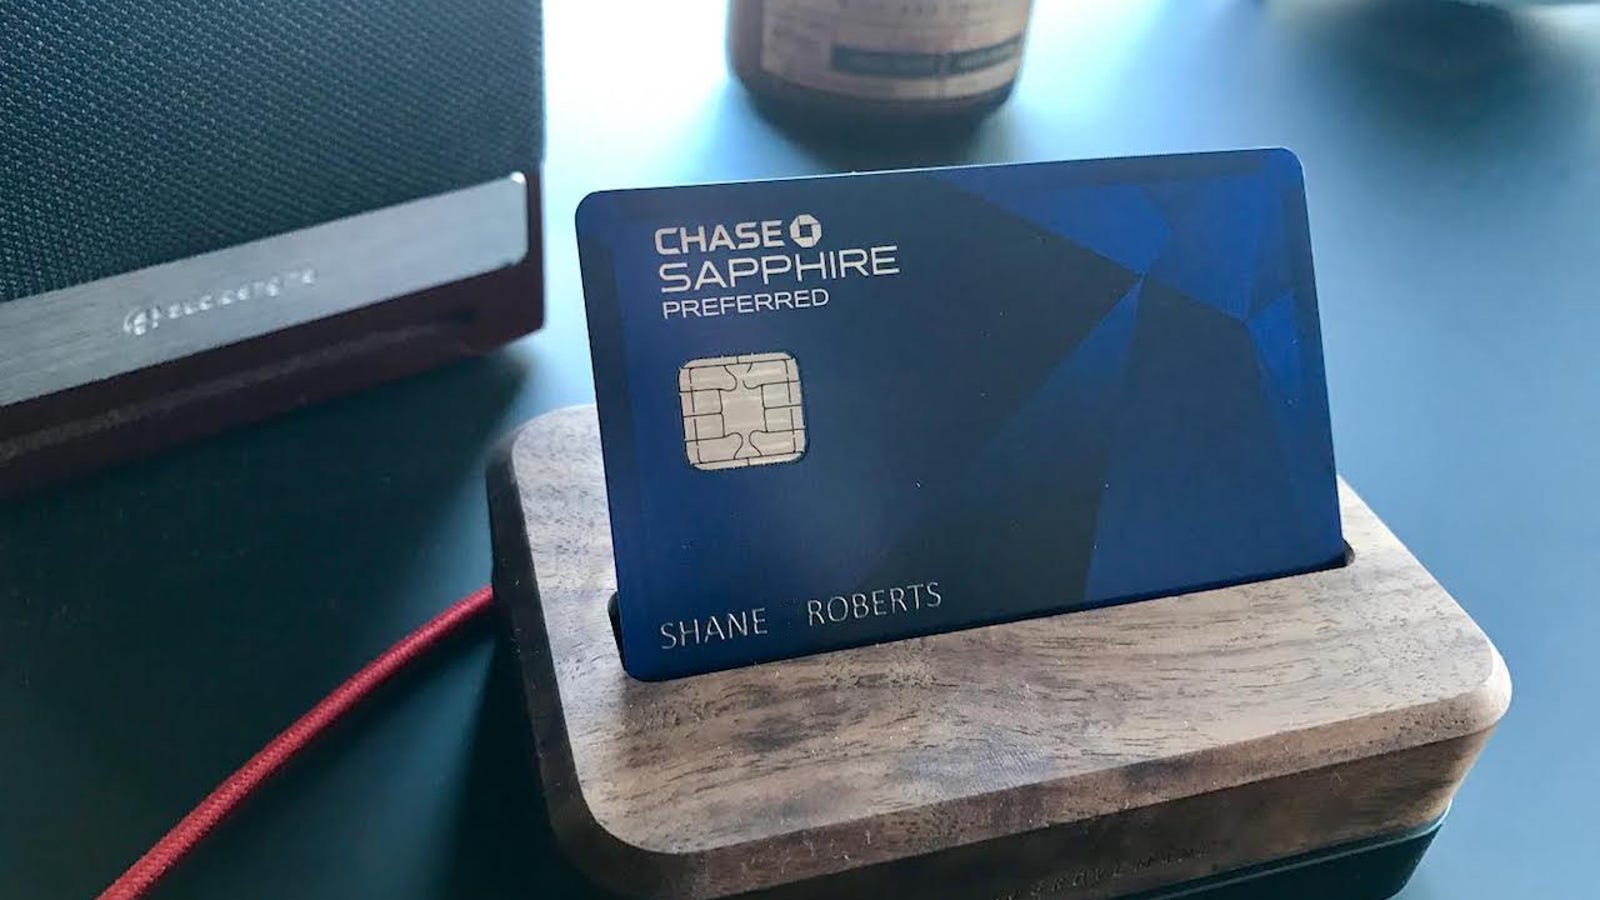 The Chase Sapphire Preferred is Still the Best Travel Rewards Credit